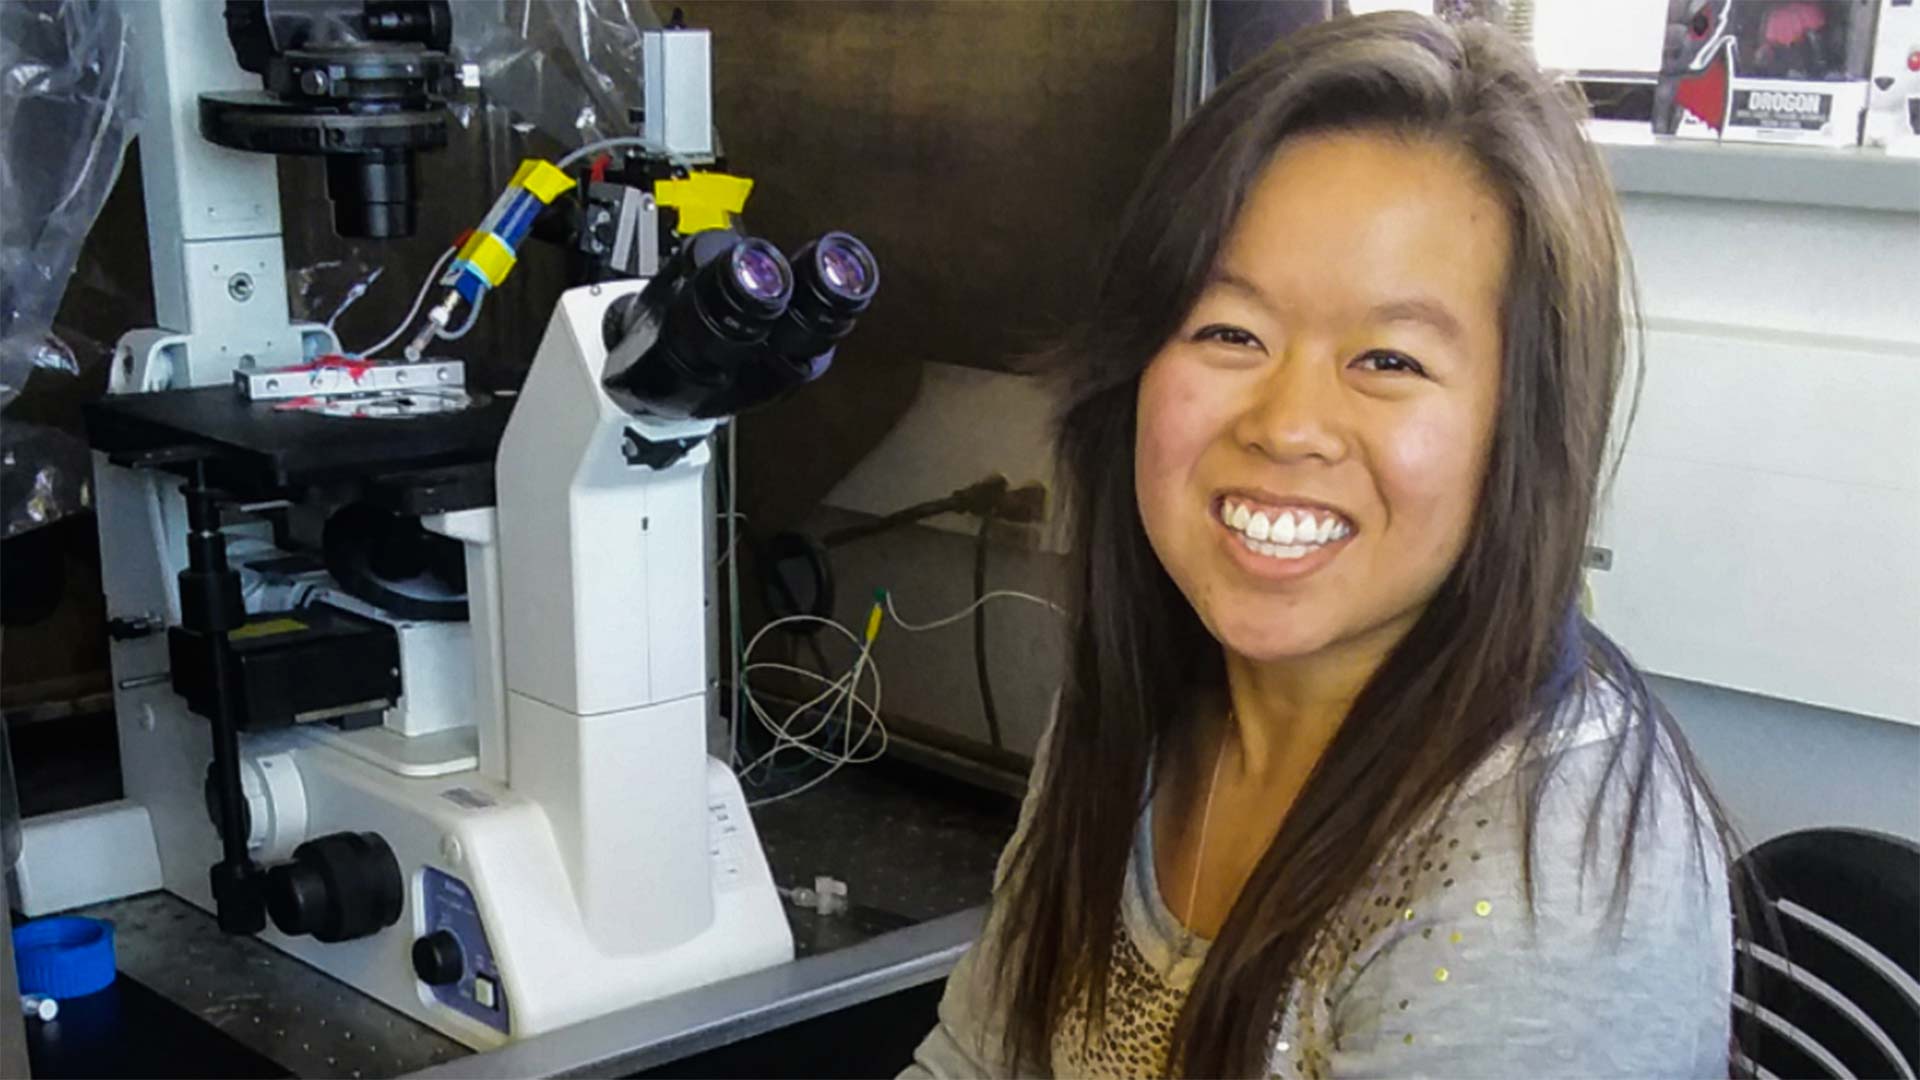 University of Arizona senior Lindsey Chew researches non-opioid pain relief as a neuroscience major.